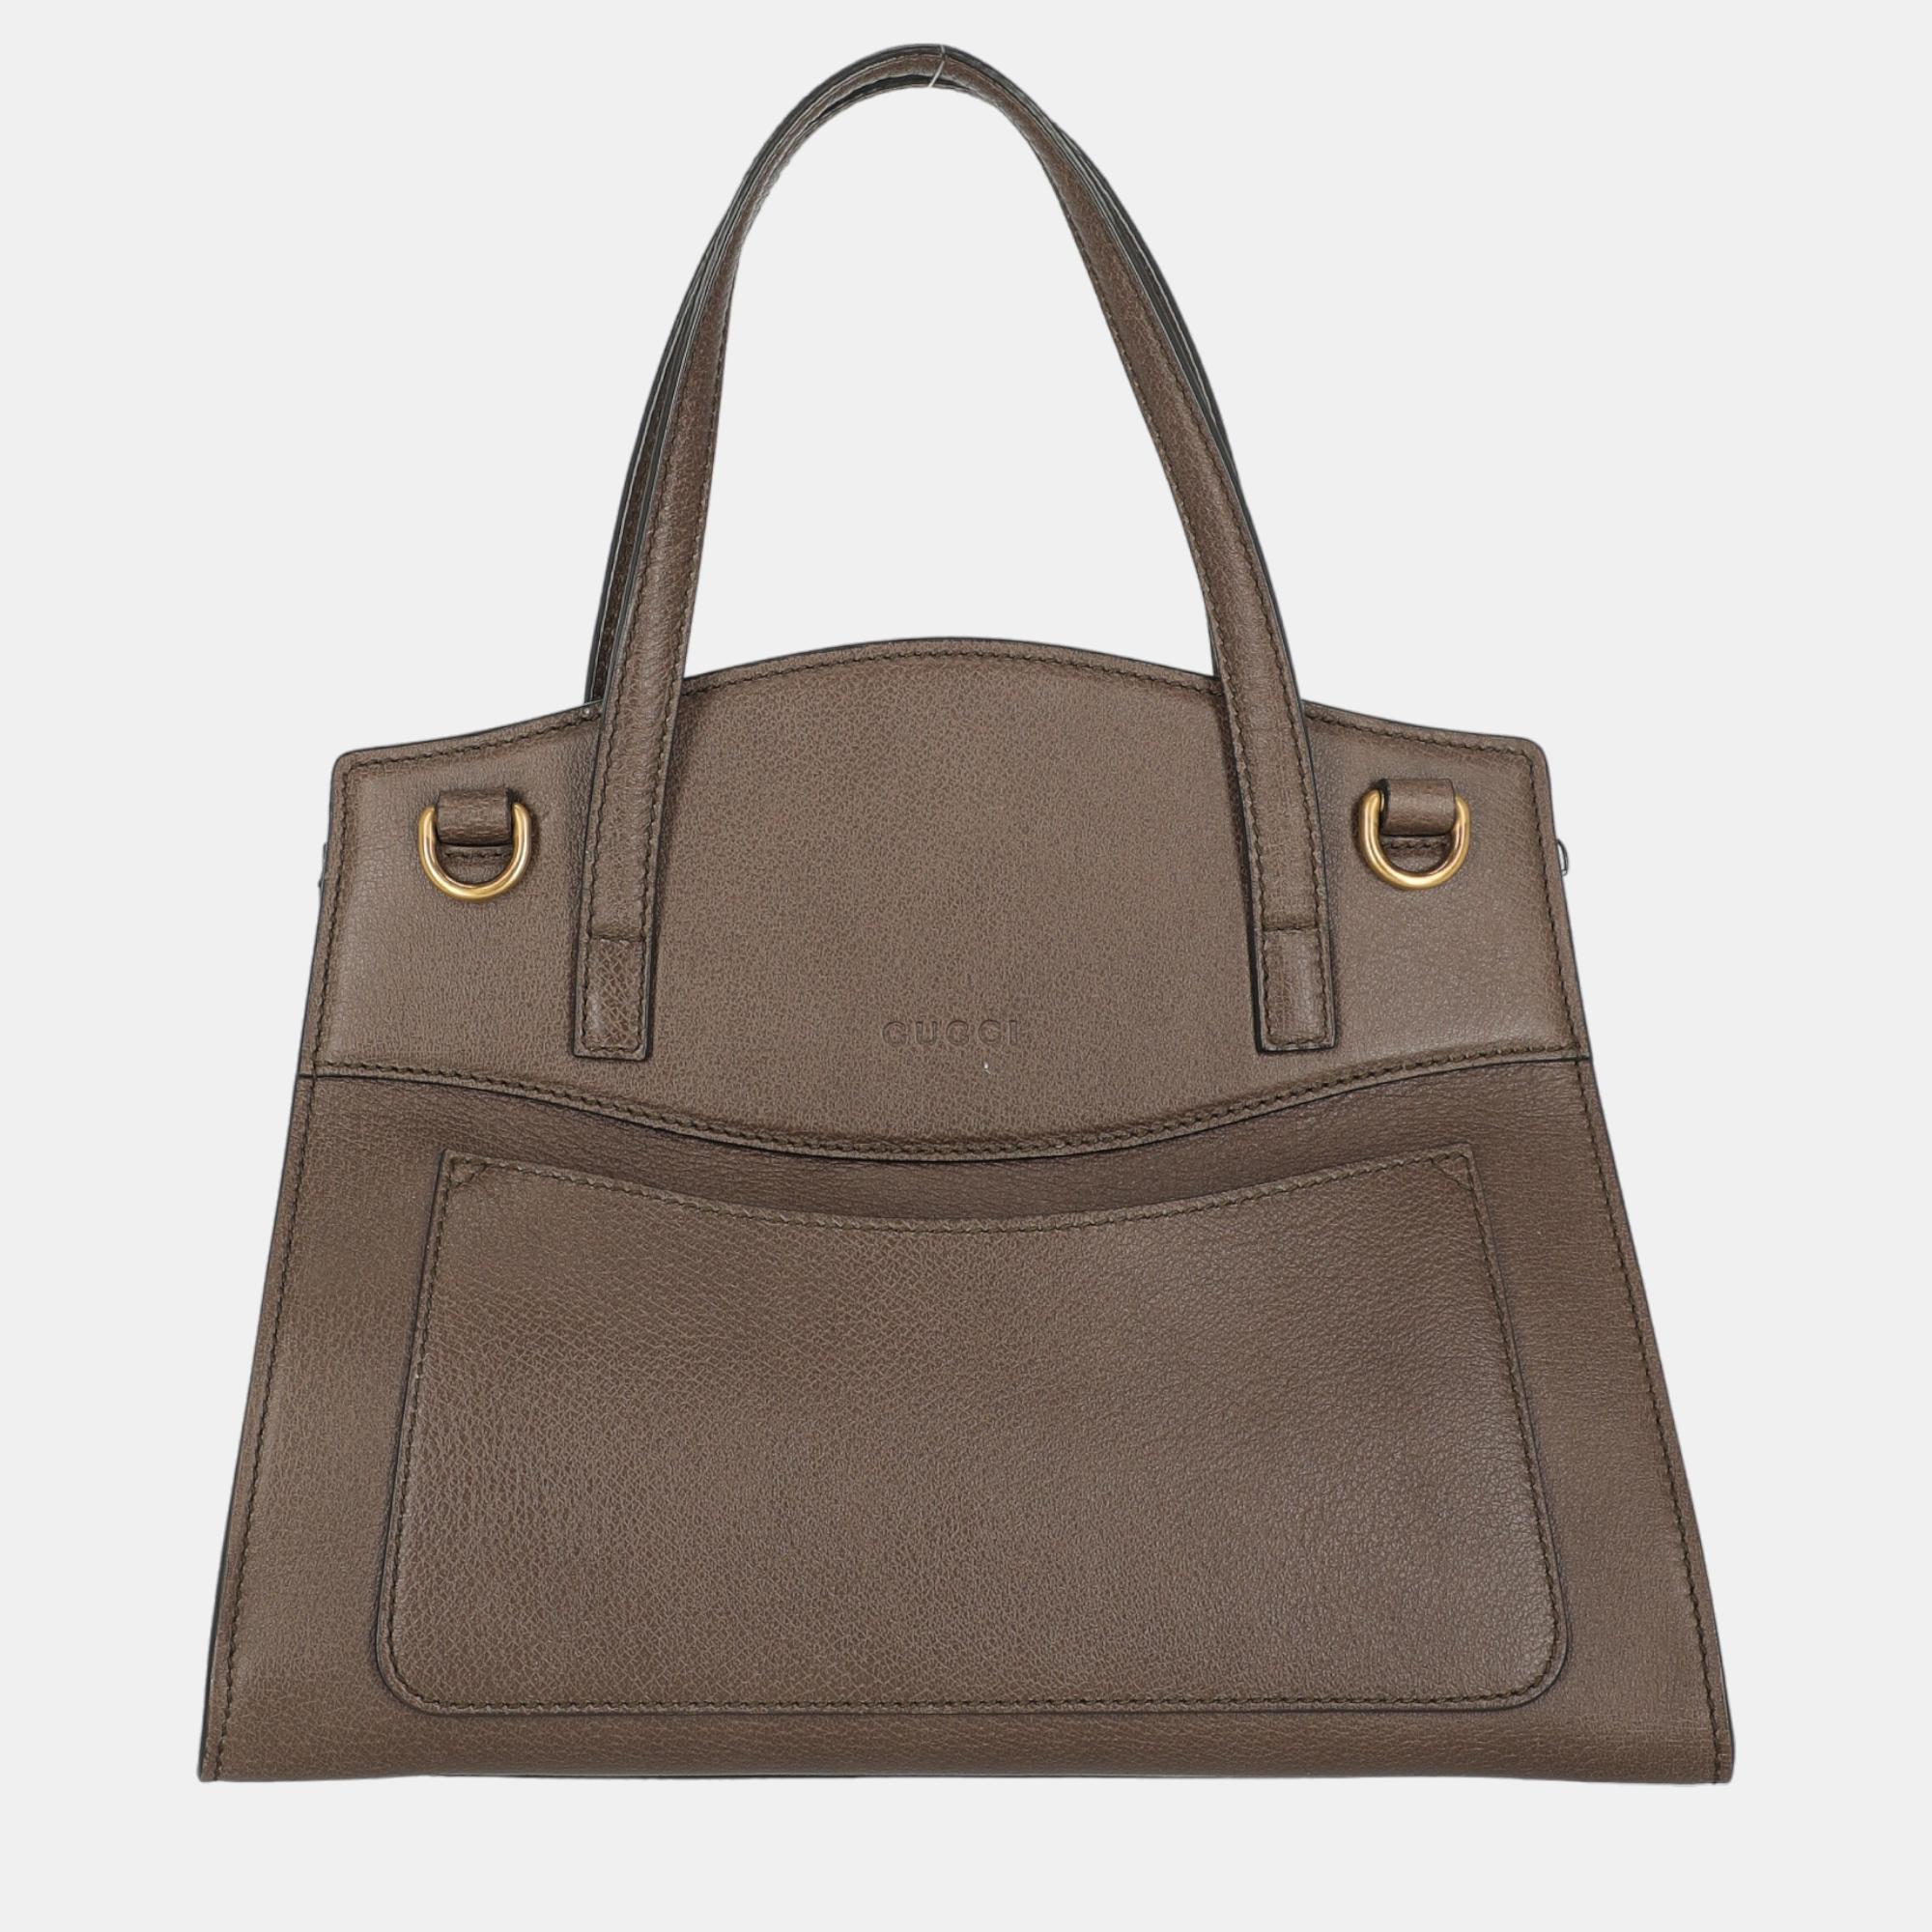 Gucci  Women's Leather Tote Bag - Brown - One Size